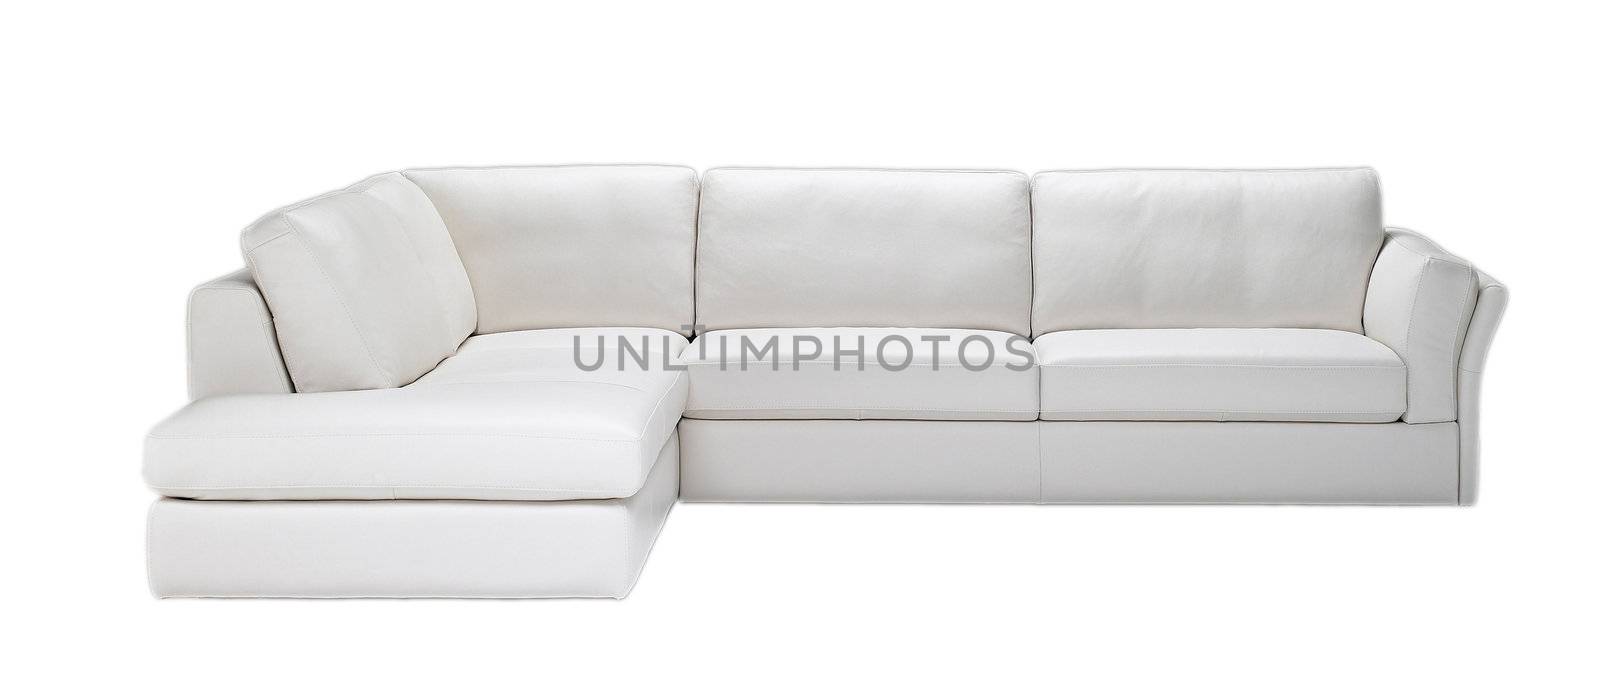 white leather sofa isolated against white background by ozaiachin